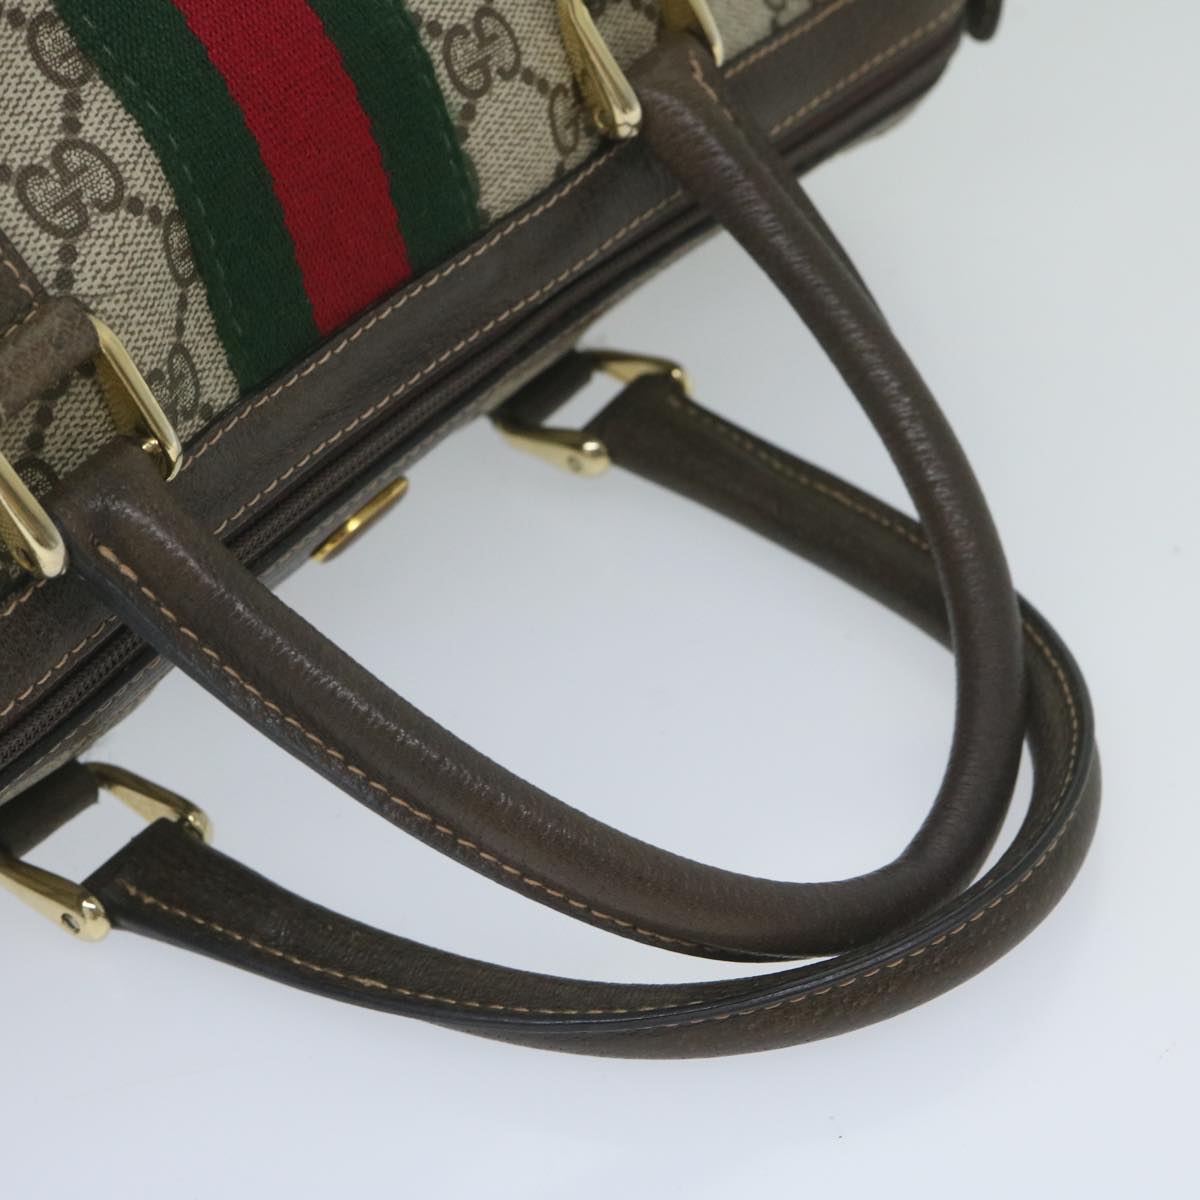 GUCCI GG Canvas Web Sherry Line Boston Bag PVC Beige Green Red Auth 61067